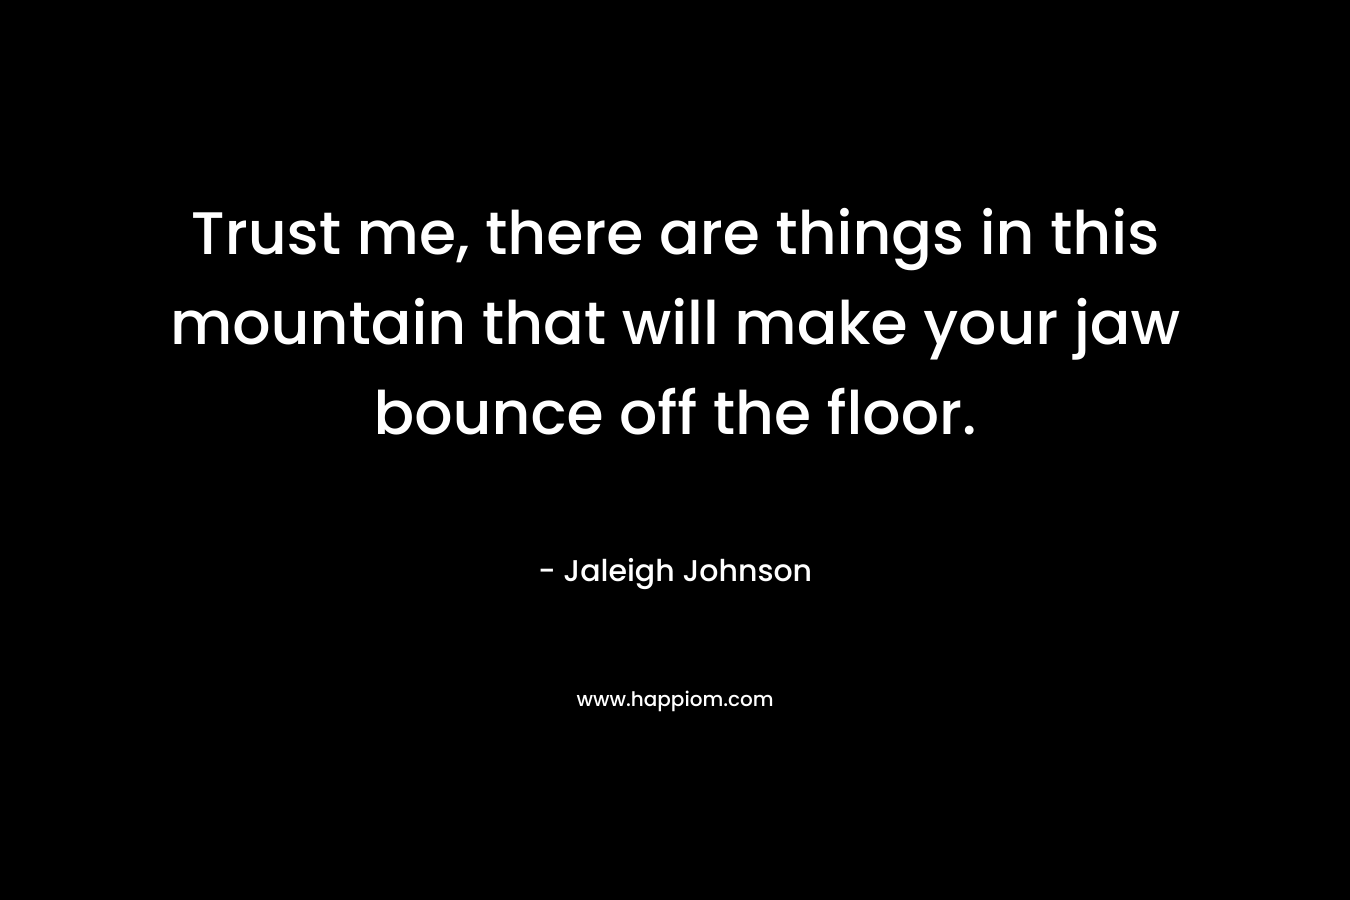 Trust me, there are things in this mountain that will make your jaw bounce off the floor. – Jaleigh Johnson